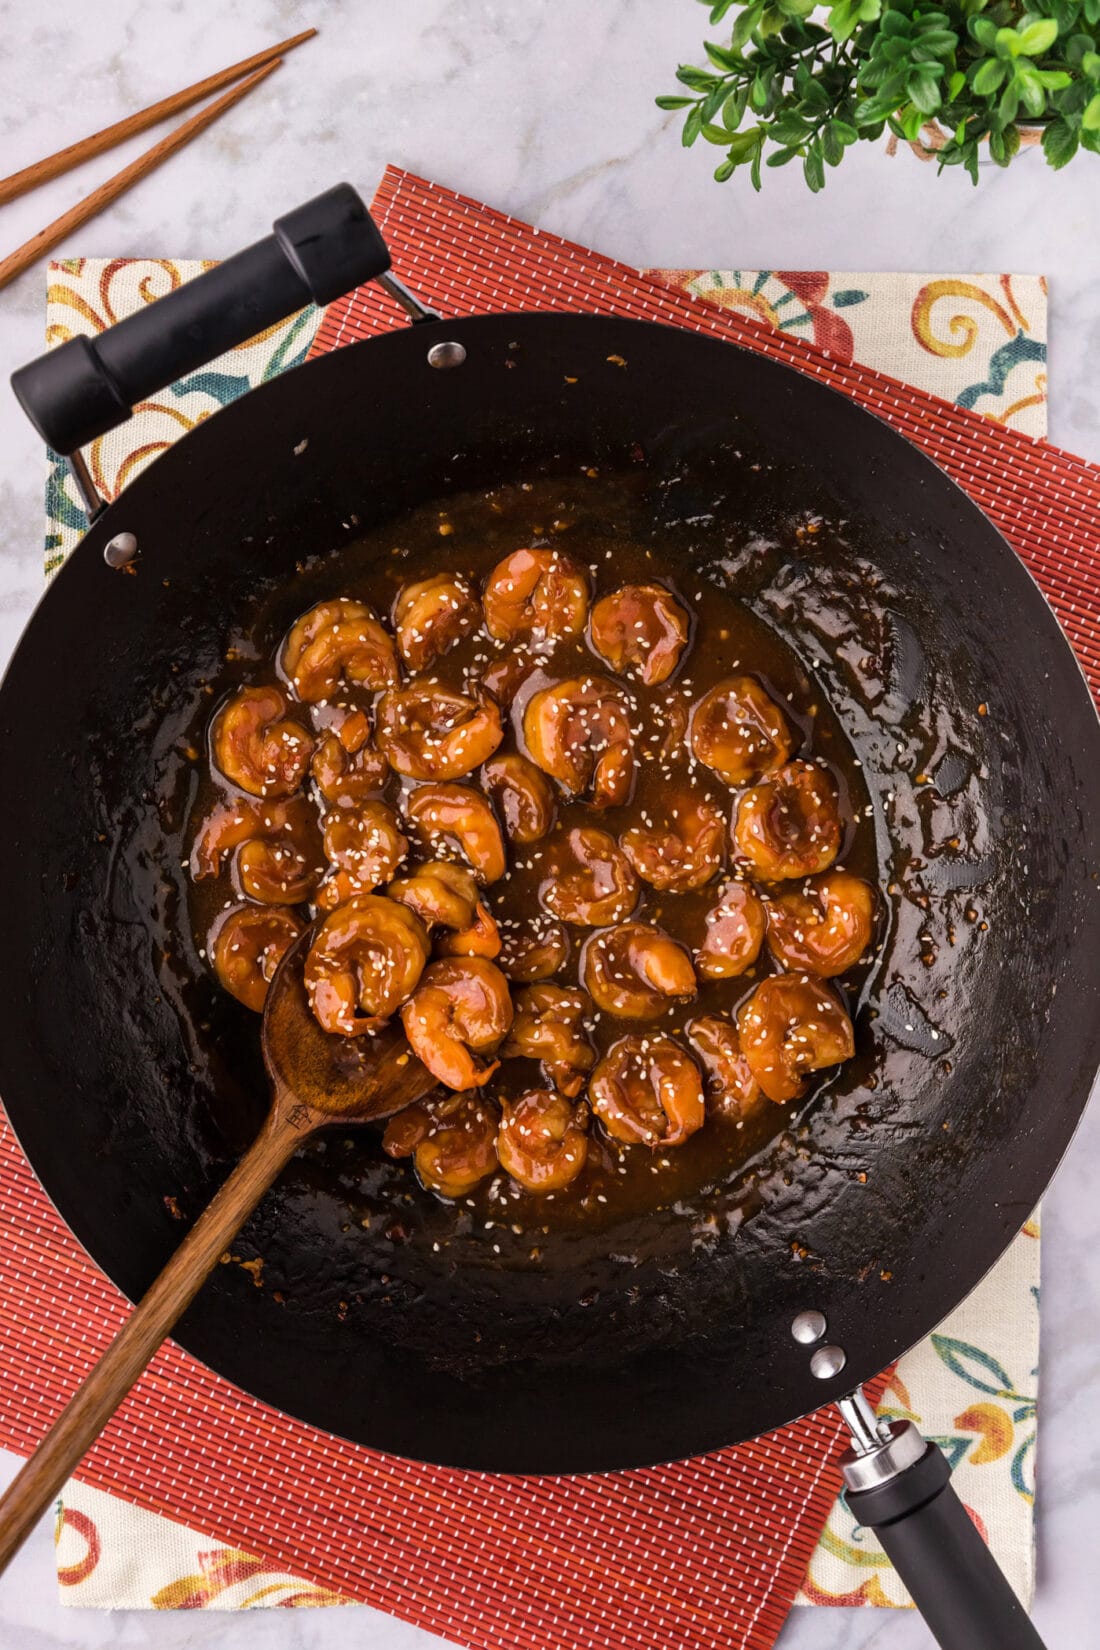 Skillet of Hunan Shrimp with a spoon in it